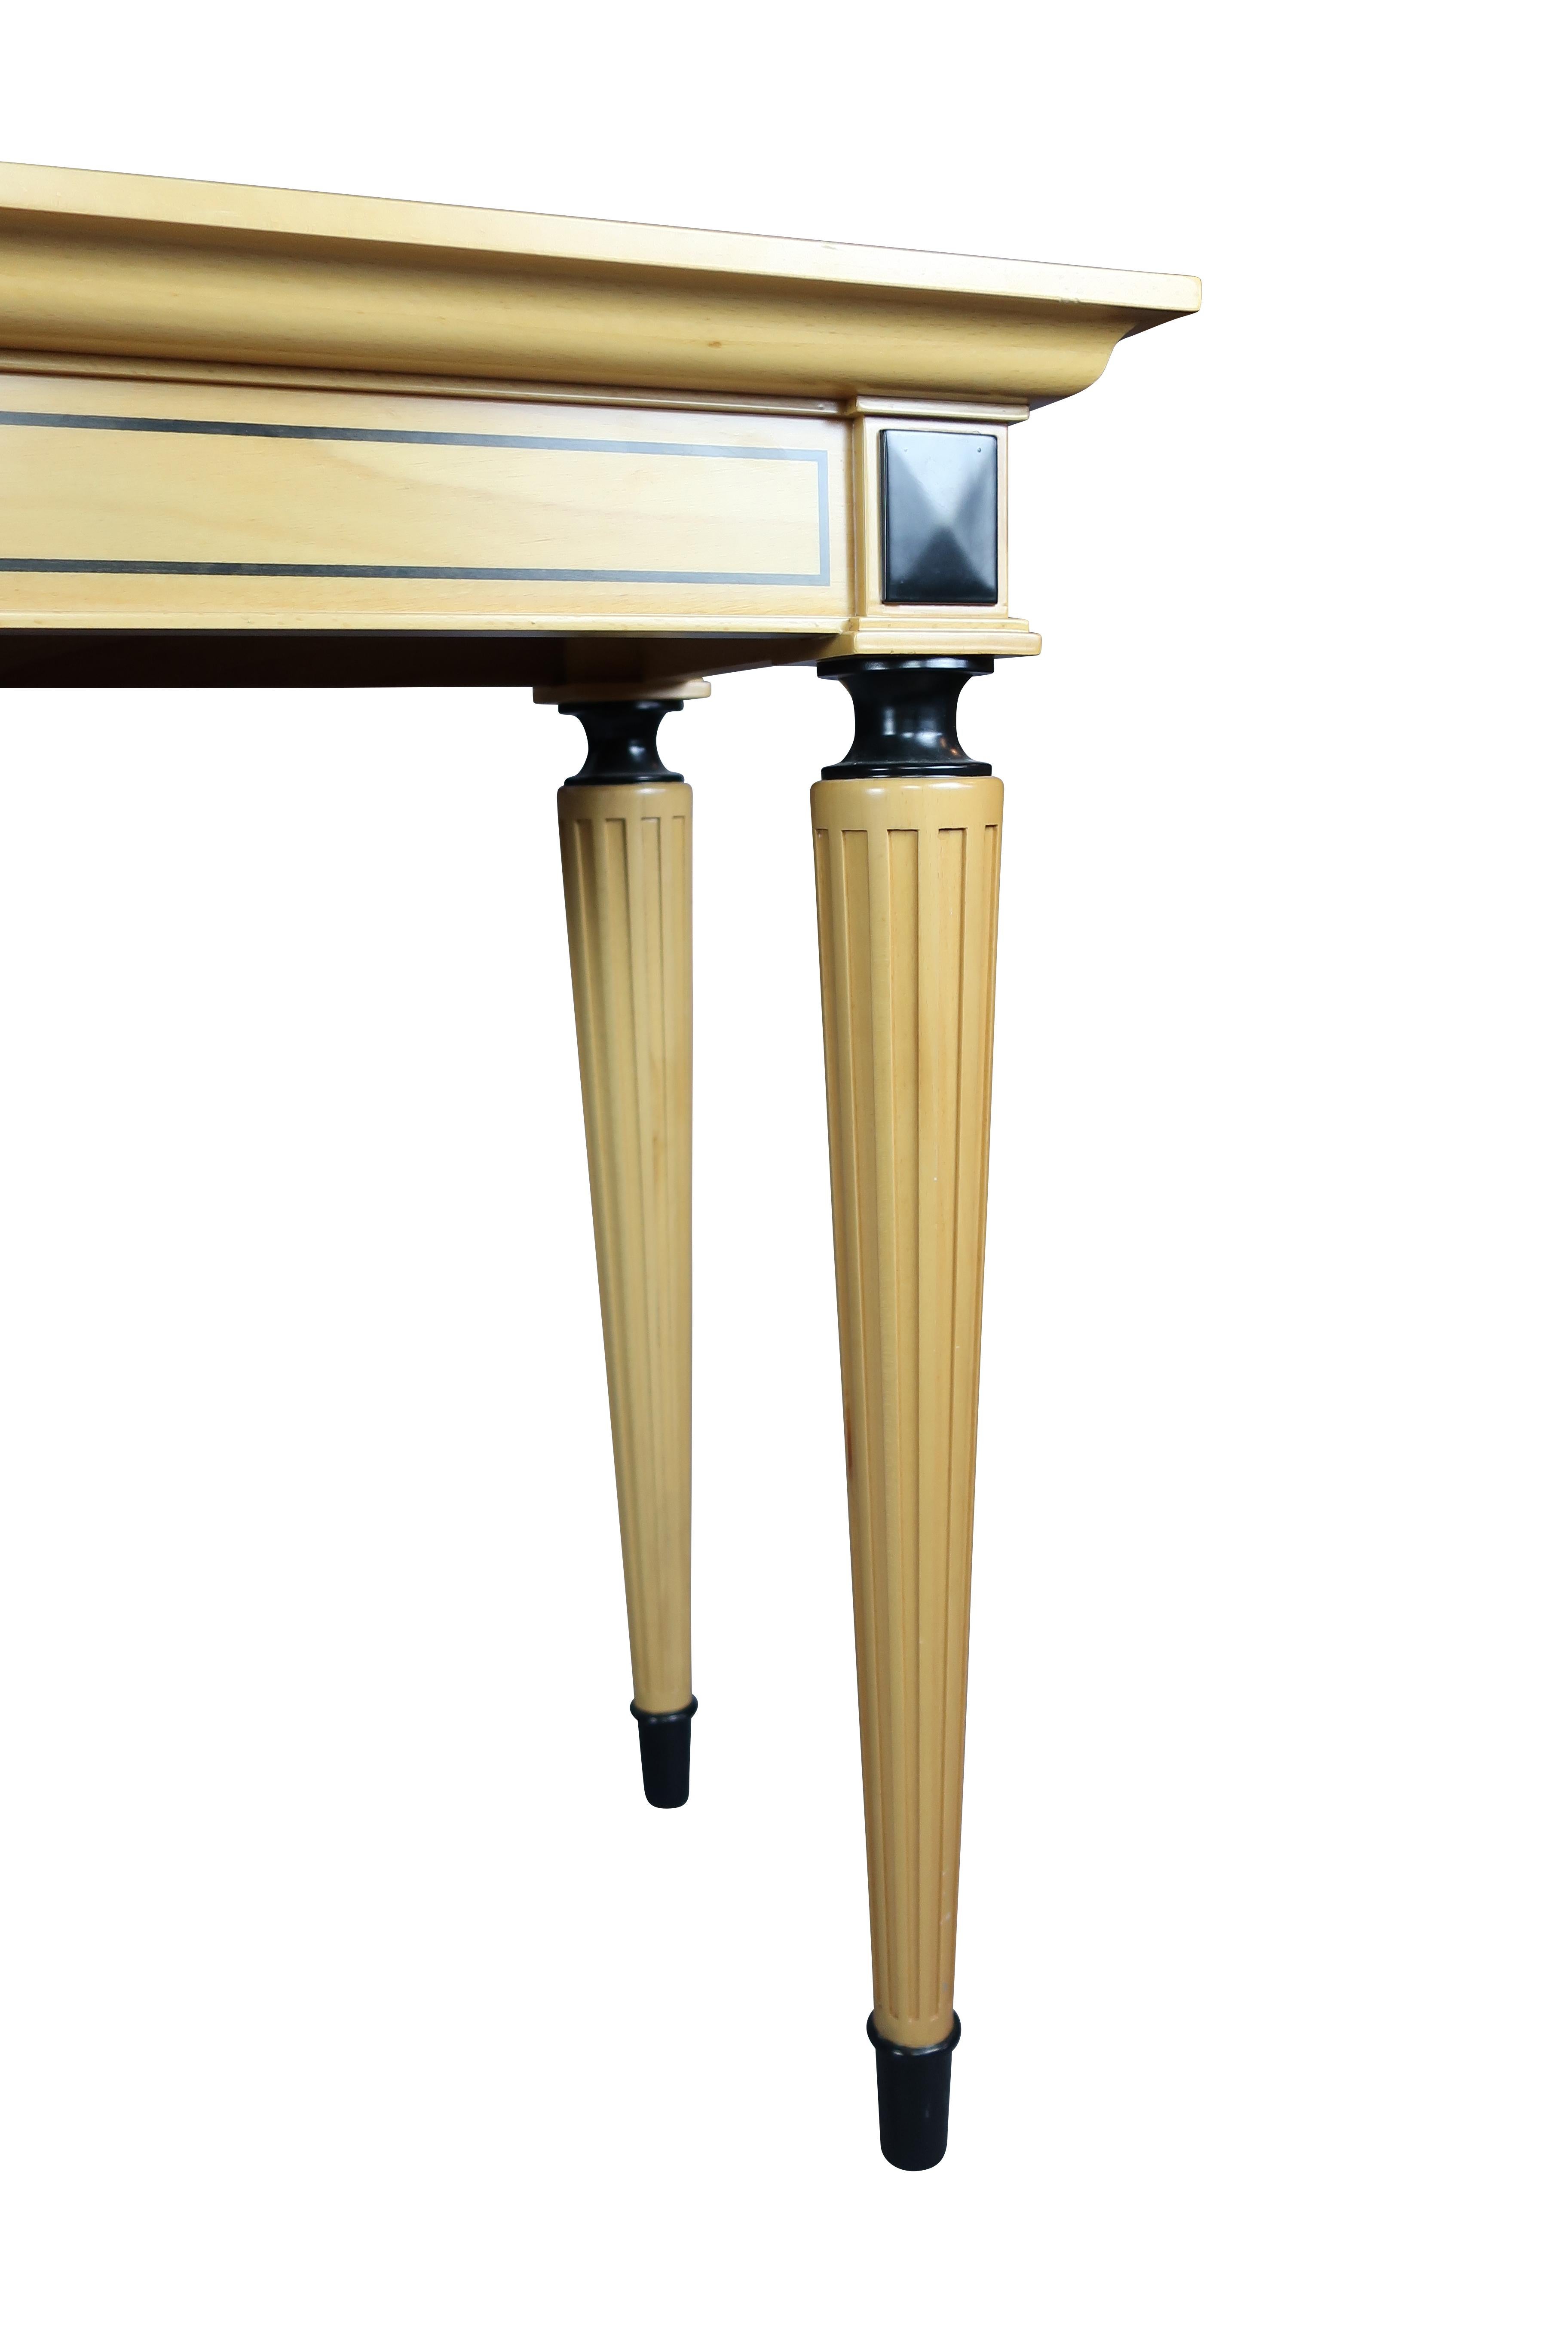 David Linley British Mid-Century Modern Marble-Top Satinwood Console Table 1